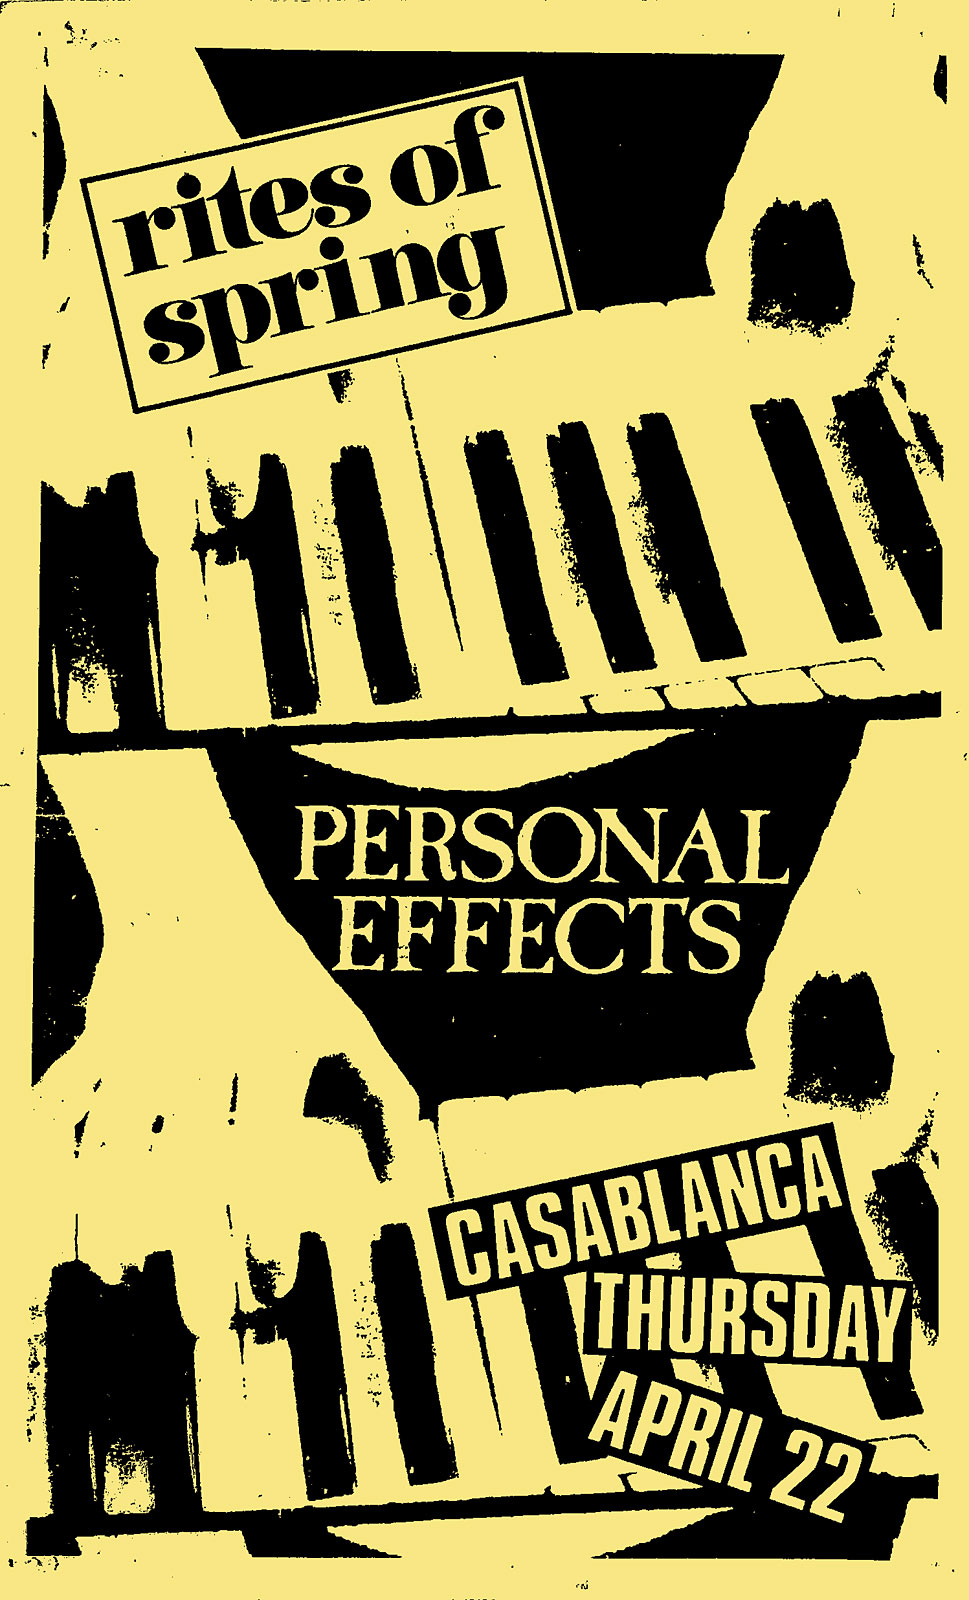 Poster for Personal Effects at Casablanca in Rochester, New York on 04.22.1982